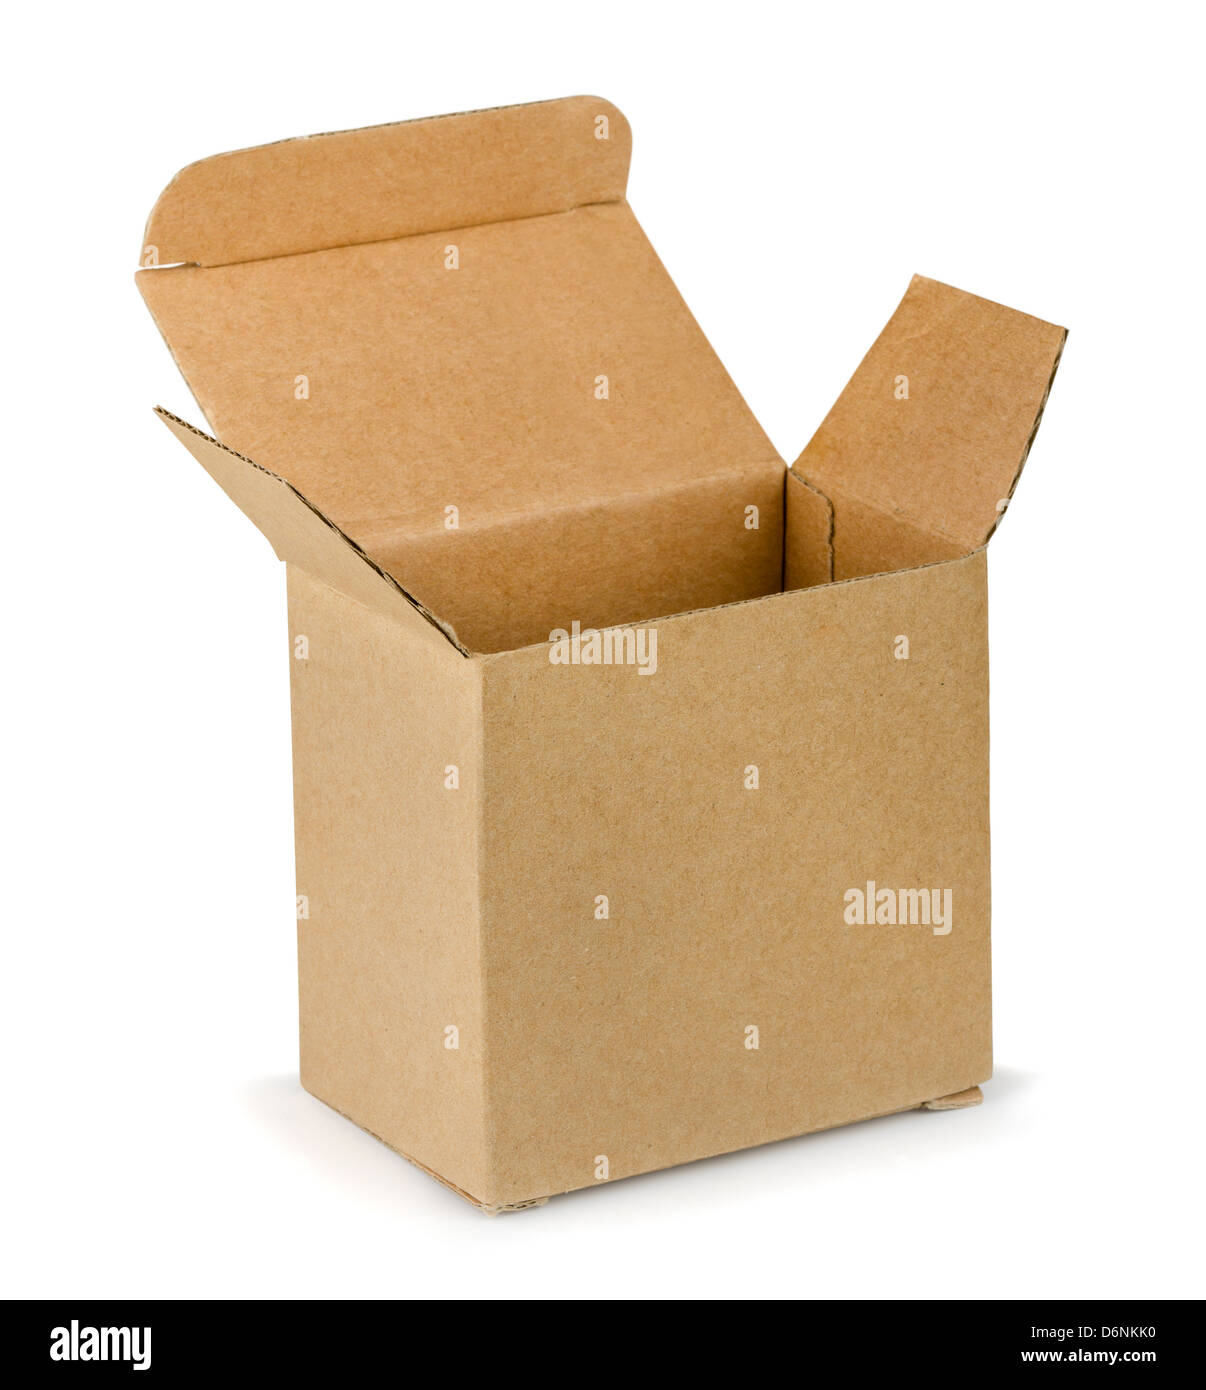 Empty open brown cardboard box isolated on white Stock Photo